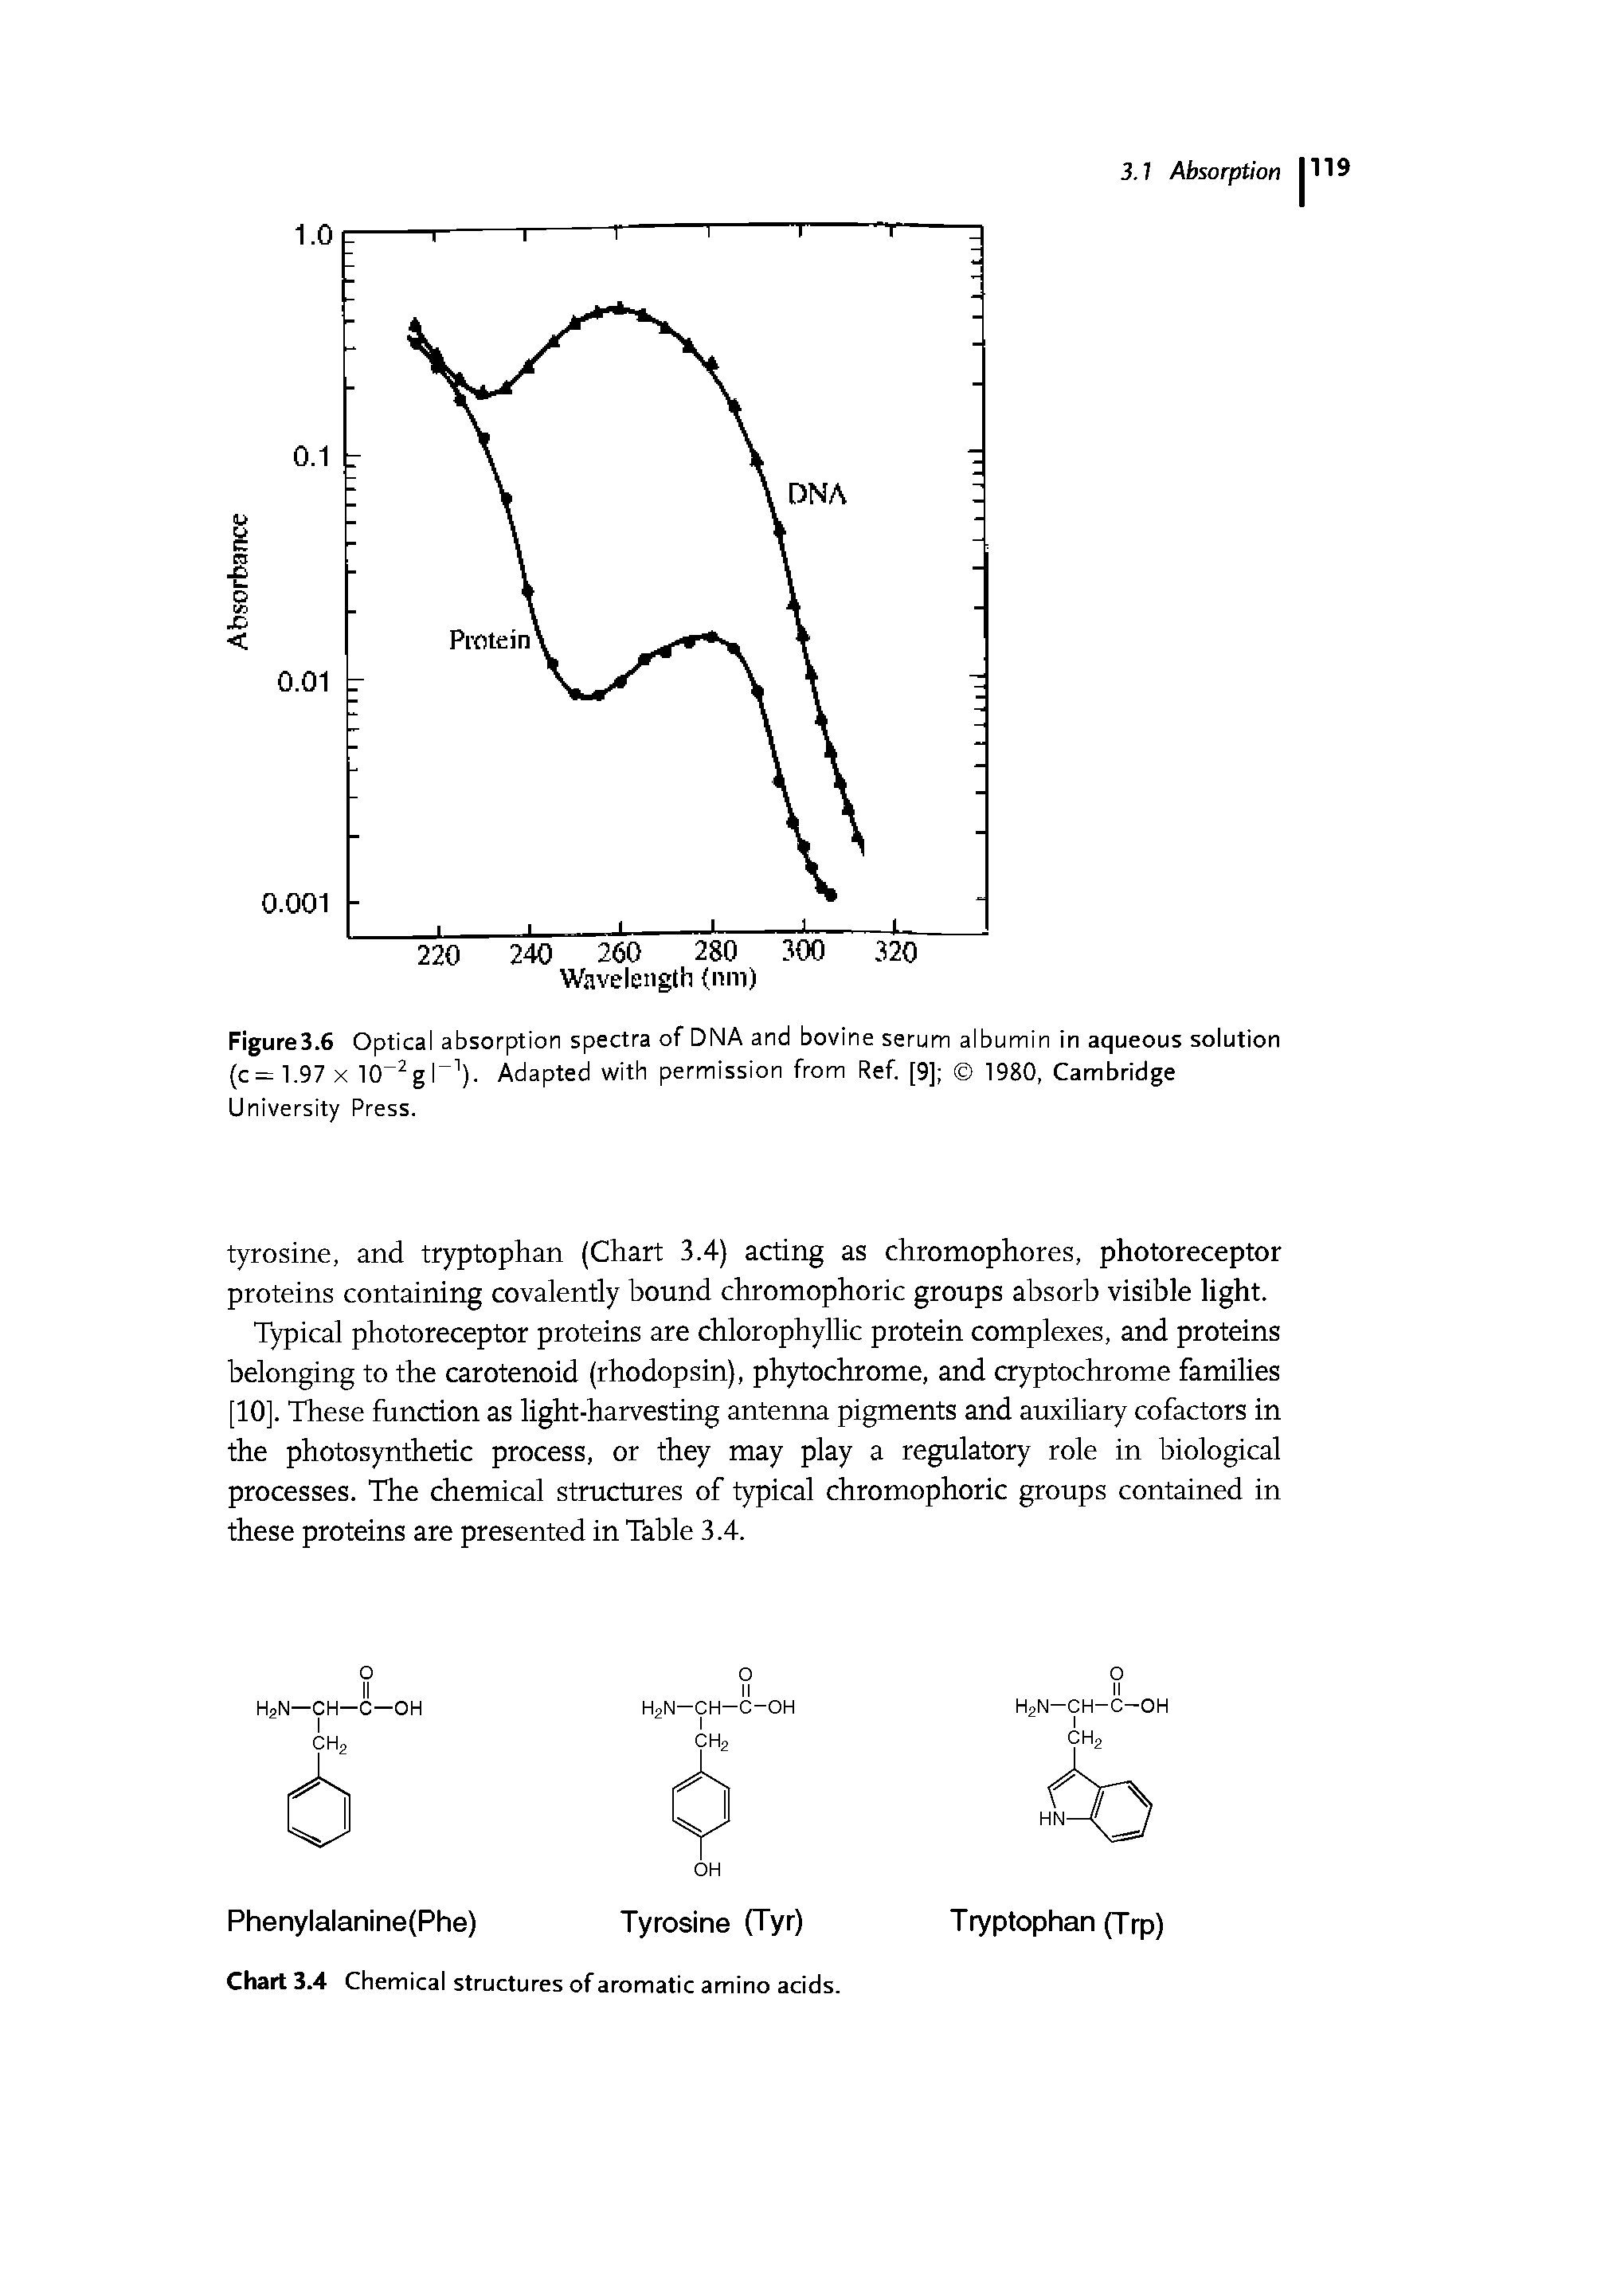 FigureS.e Optical absorption spectra of DNA and bovine serum albumin in aqueous solution c= 1.97 X lO grY Adapted with permission from Ref. [9] 1980, Cambridge University Press.